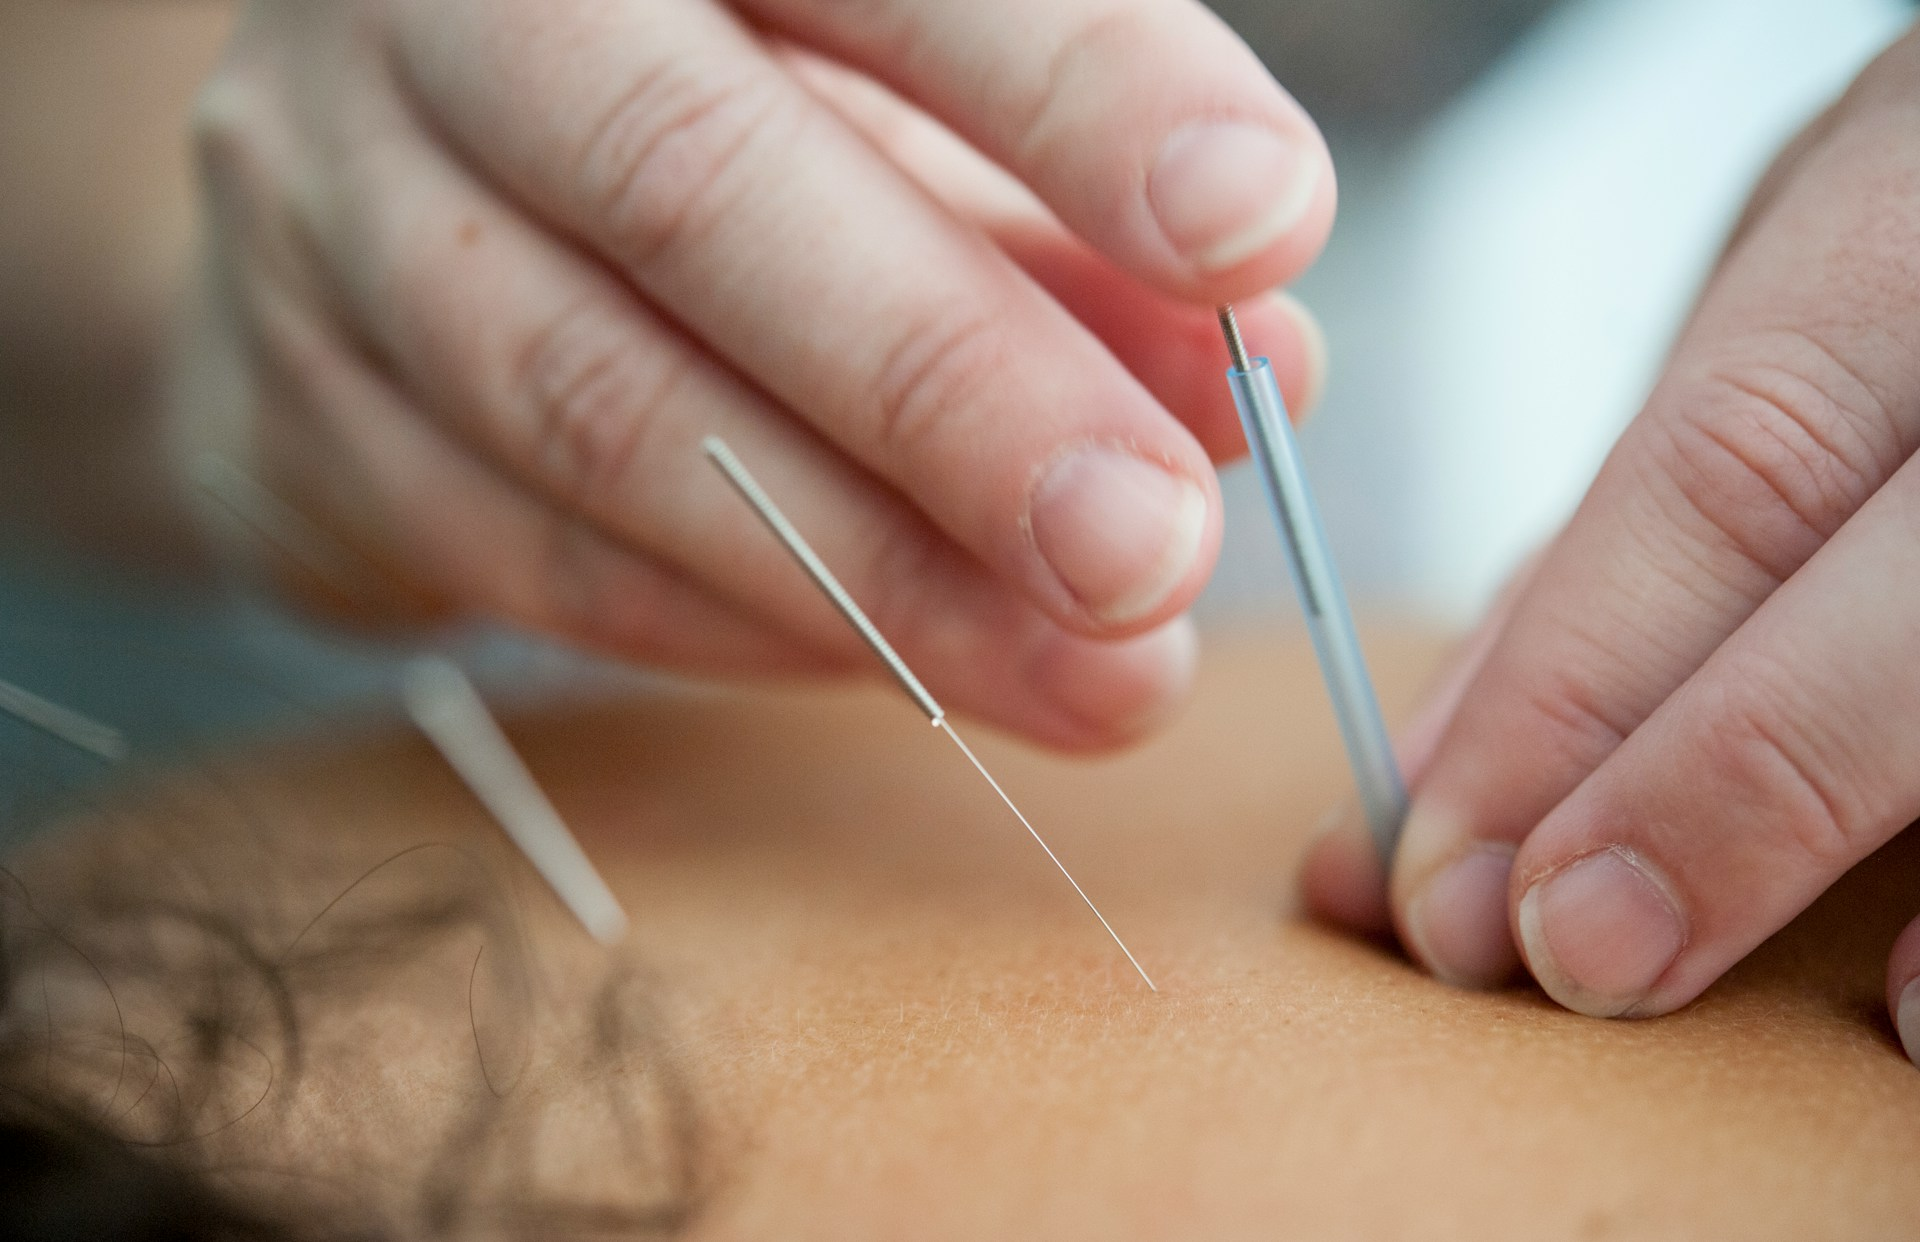 An acupuncture expert slowly and gently applying acupuncture needles during a session - https://unsplash.com/photos/person-holding-silver-and-white-pen-QgcdtM9rA5s